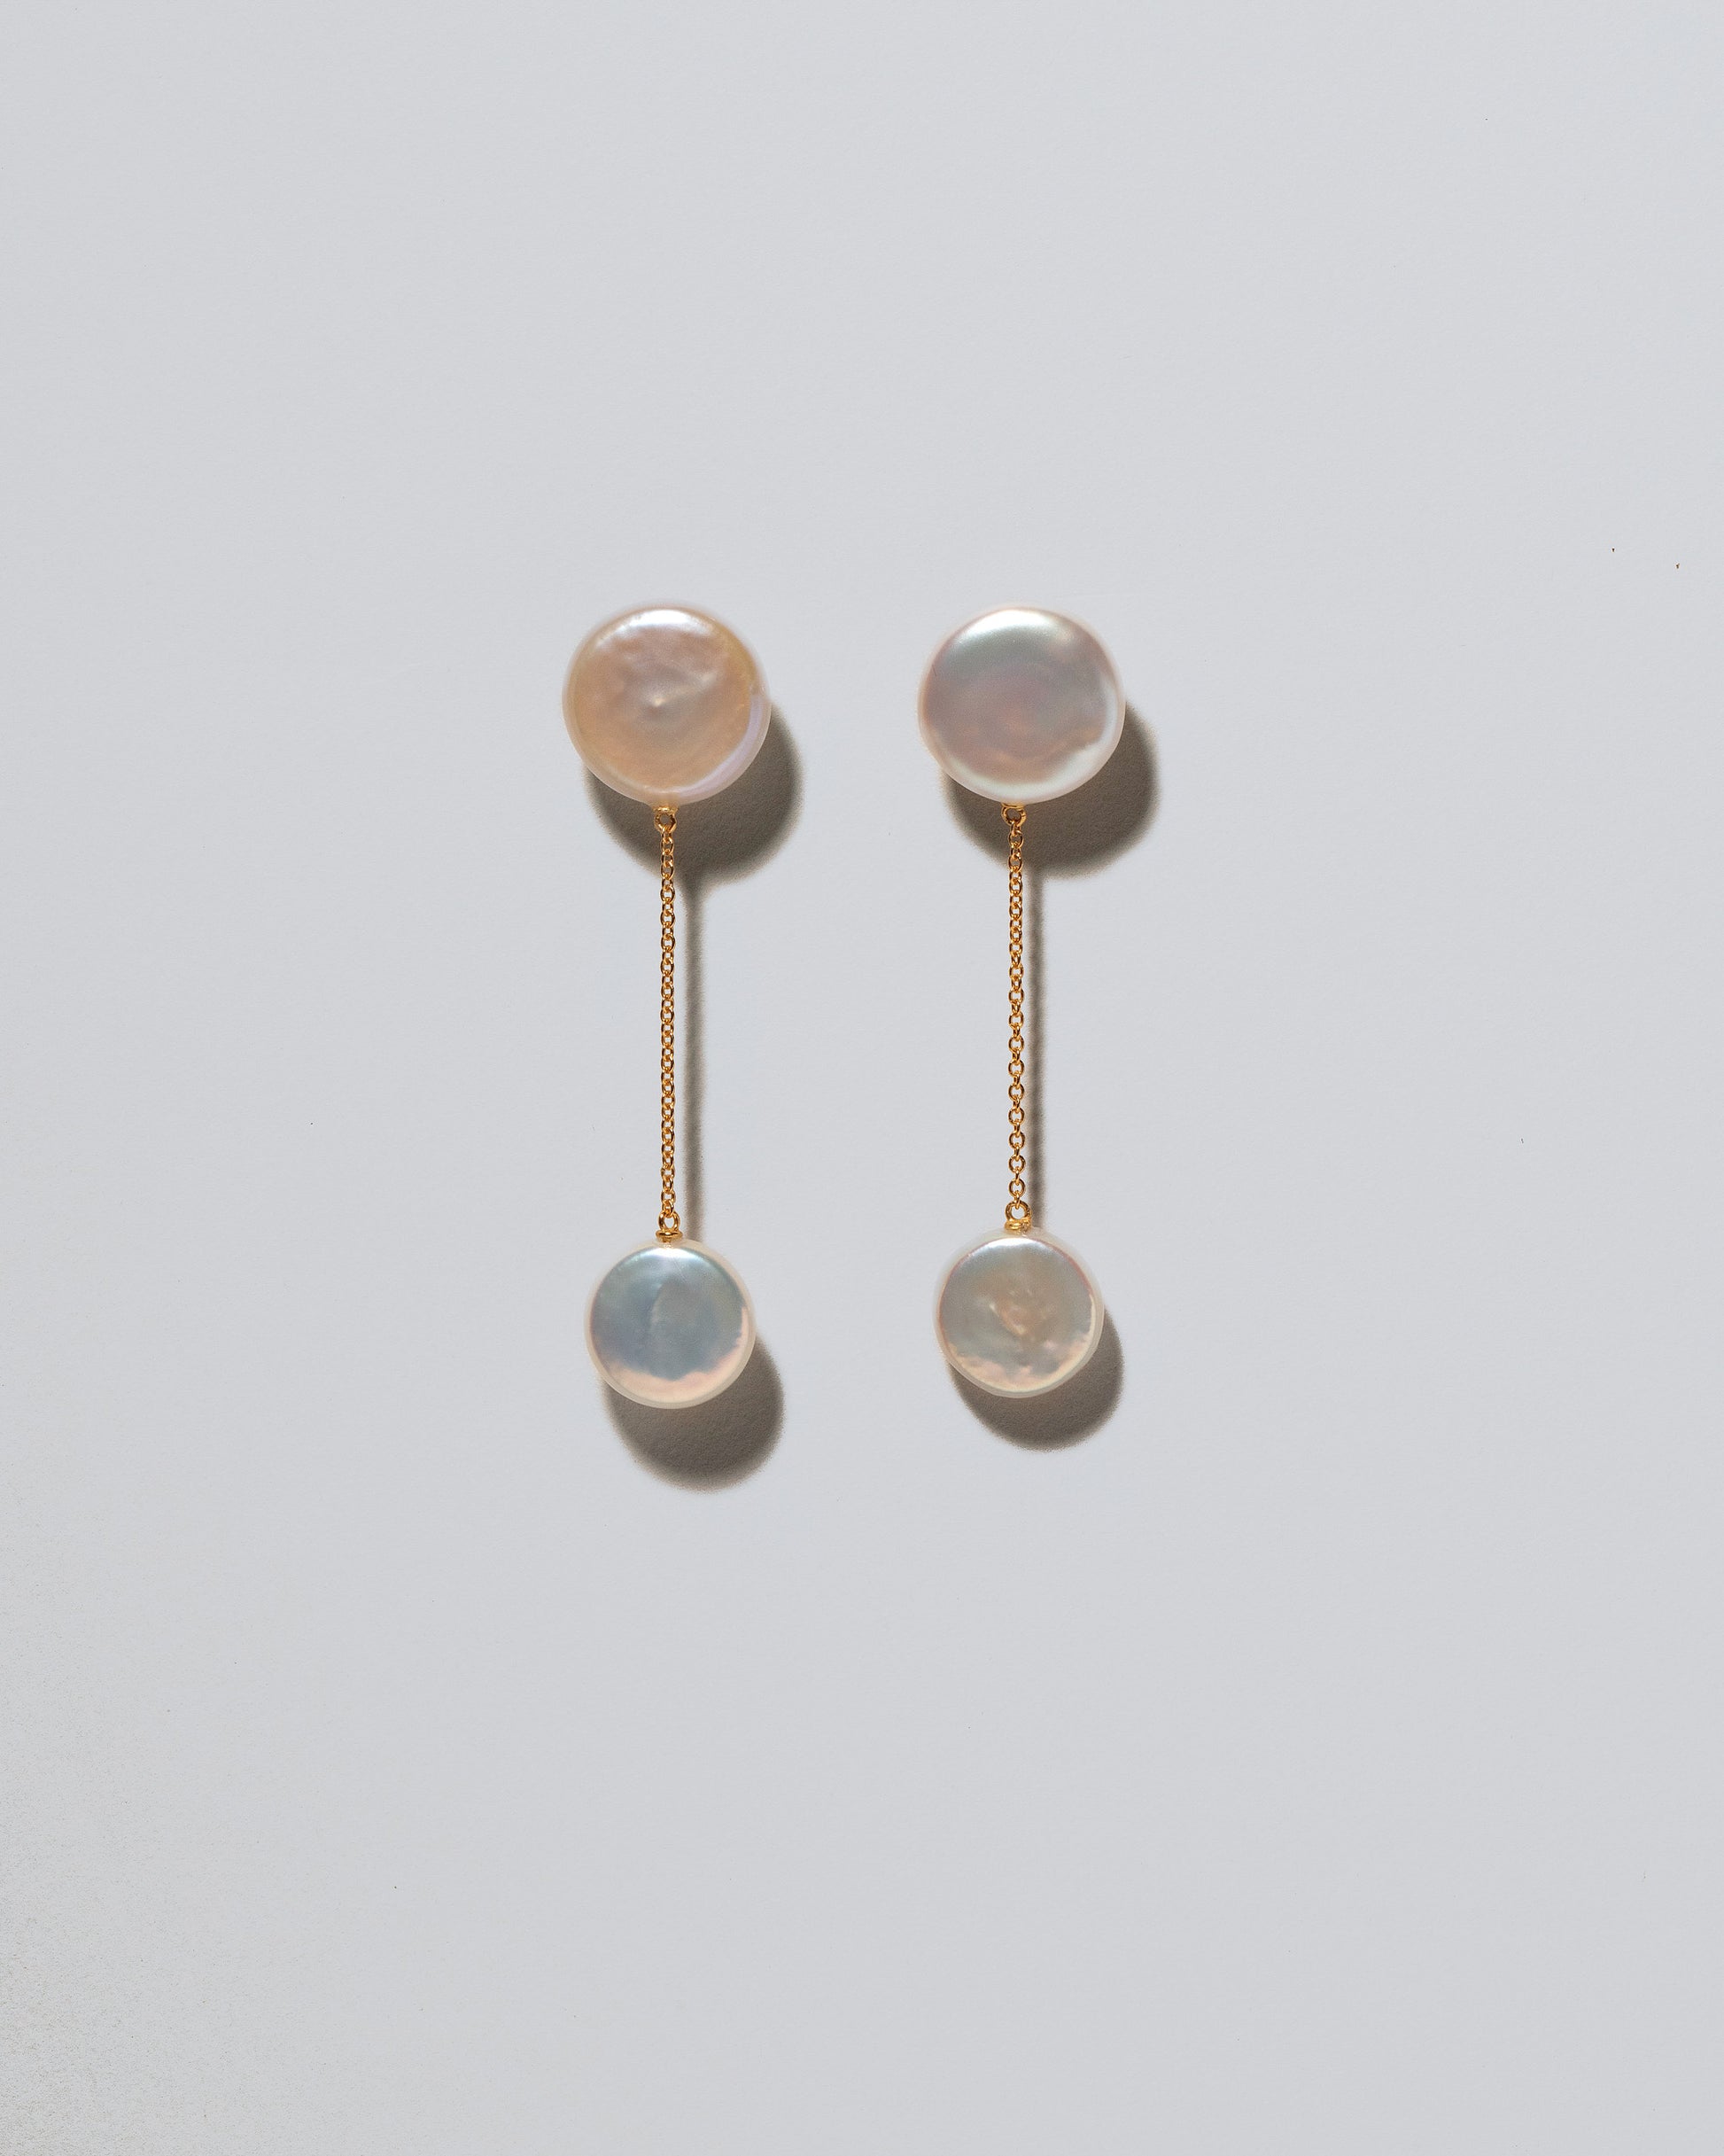 Plover Pearl Earrings on light color background.